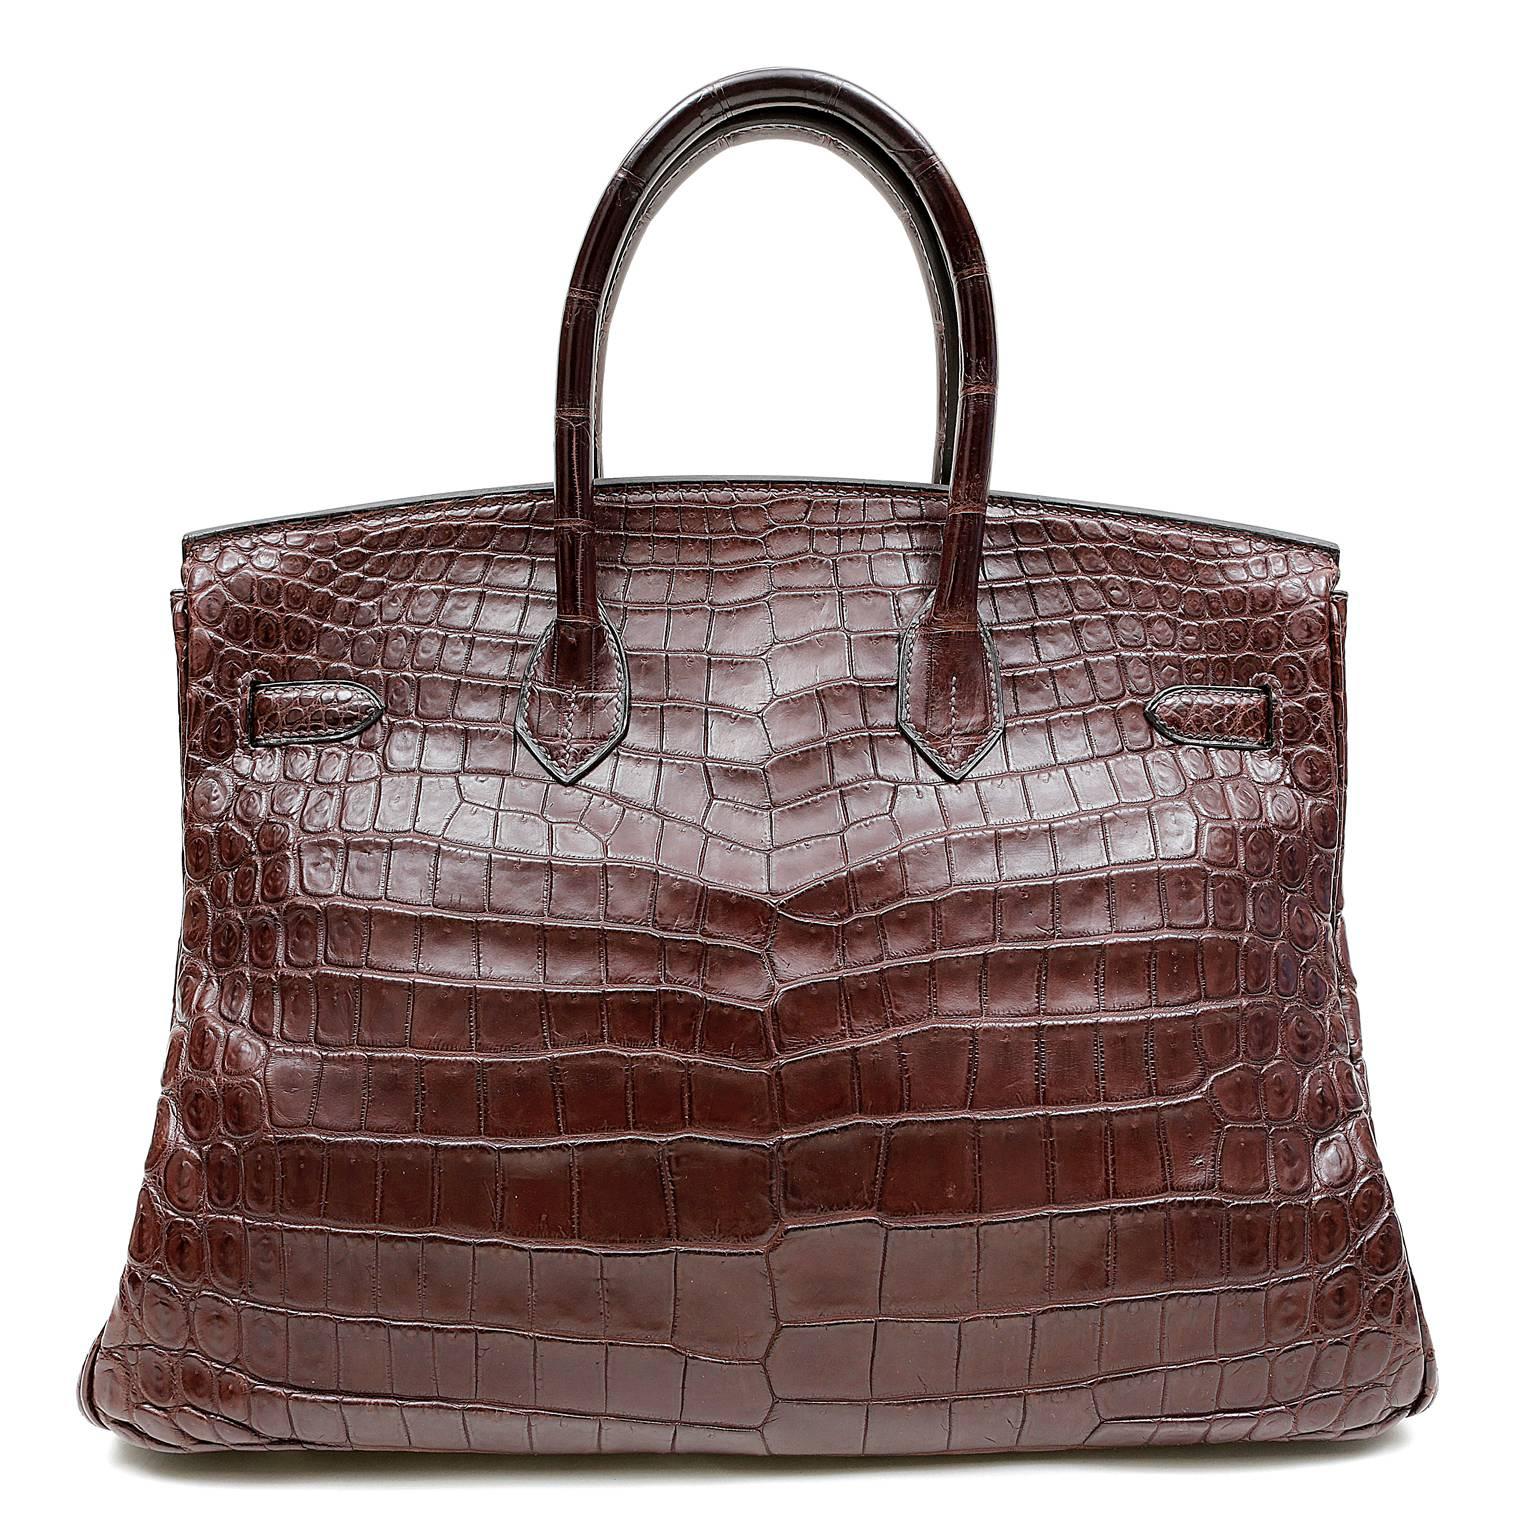 Hermès Ebene Niloticus Crocodile 35cm Birkin- Pristine conditon
  Incredibly rare and specially ordered, this exotic Birkin is truly stunning in deep brown Ebene croc with Palladium hardware.  

Hermès bags are considered the ultimate luxury